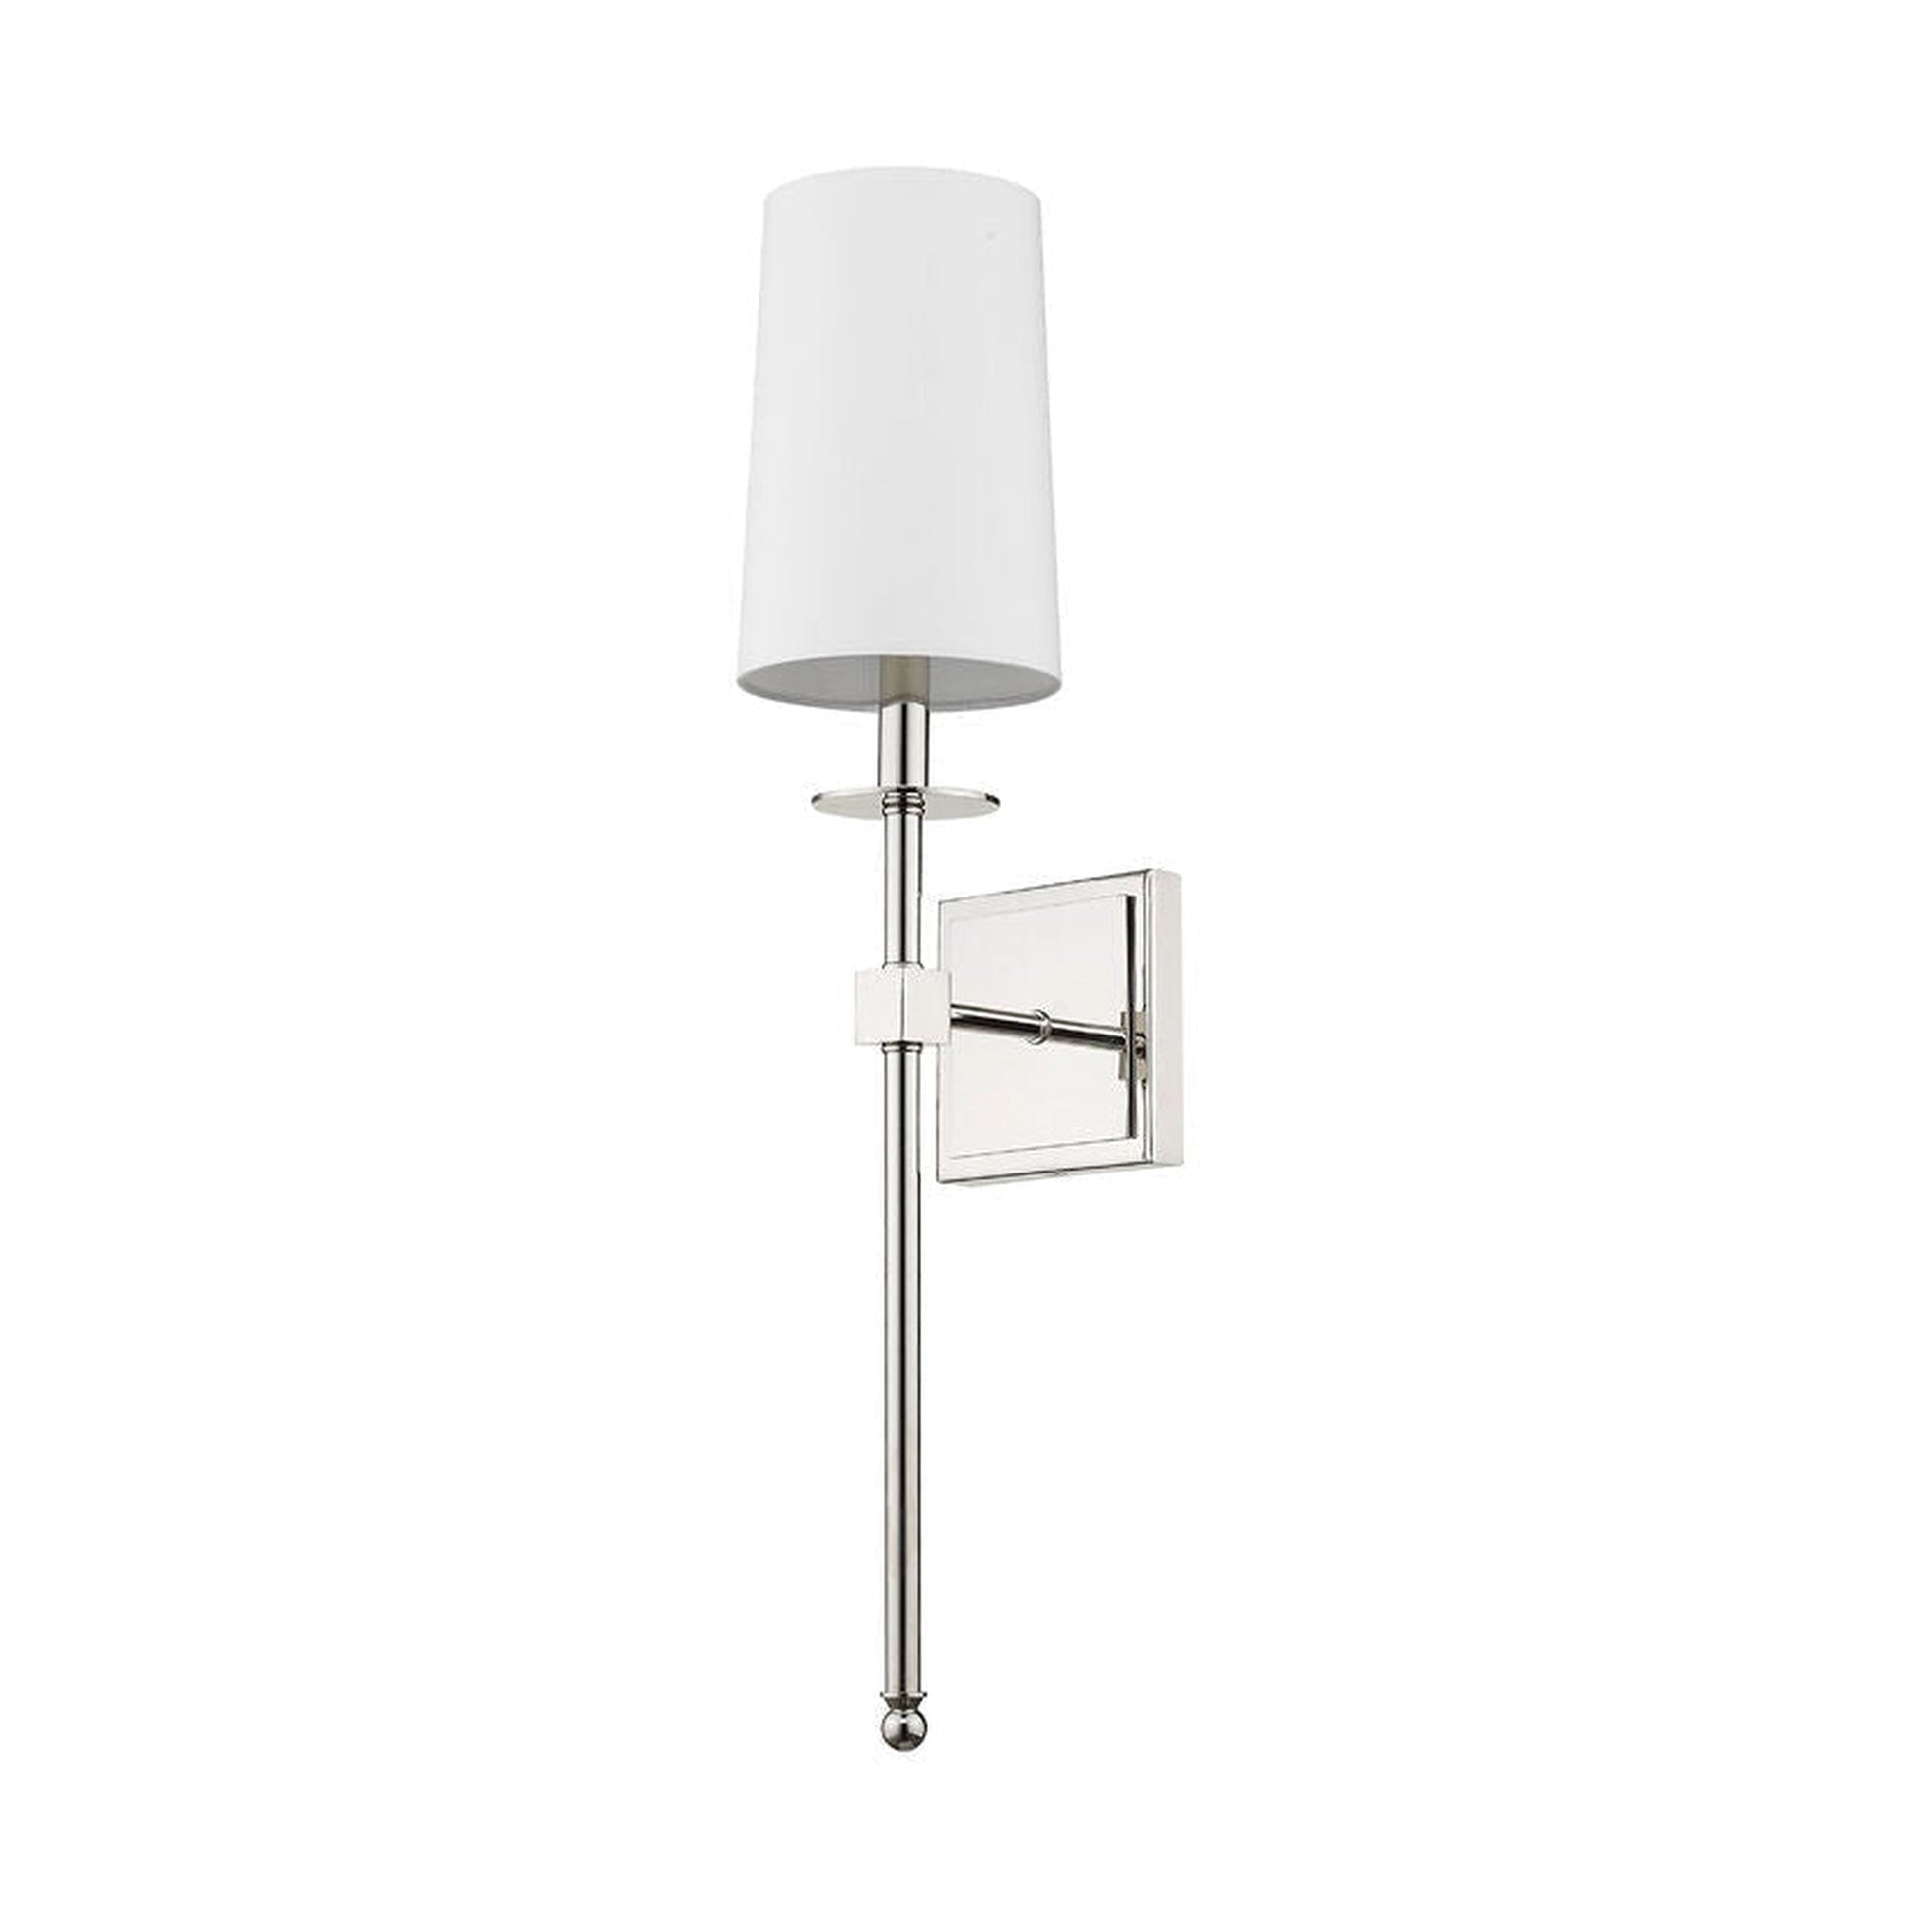 Z-Lite Camila 6" 1-Light Polished Nickel Wall Sconce With White Fabric Shade